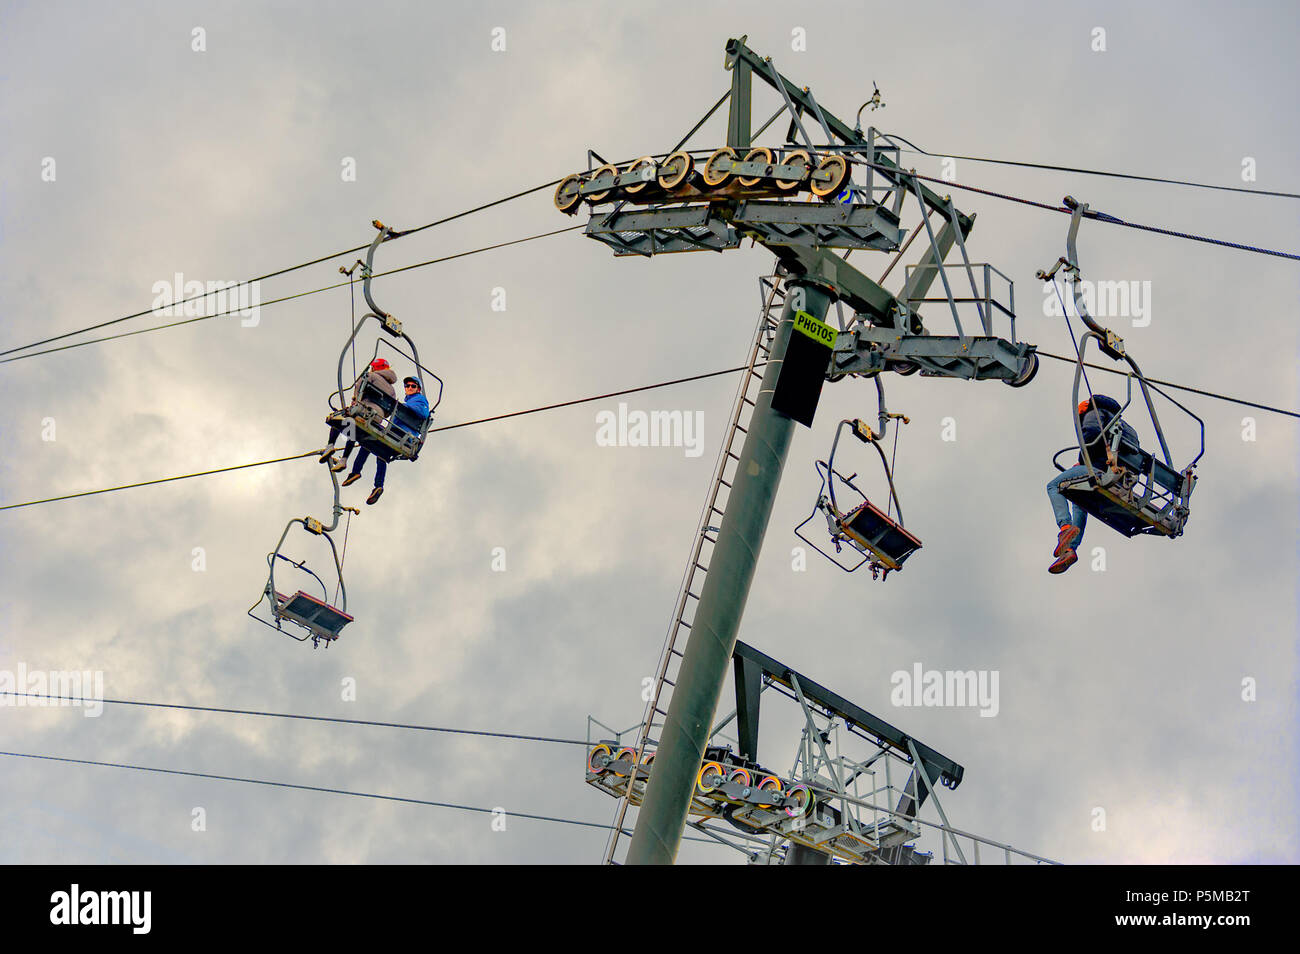 Queenstown, NZ – April 15, 2018: Fun riders with their carts on a cable chair lift going up the hill top for a luge ride with mountains and snow. Stock Photo